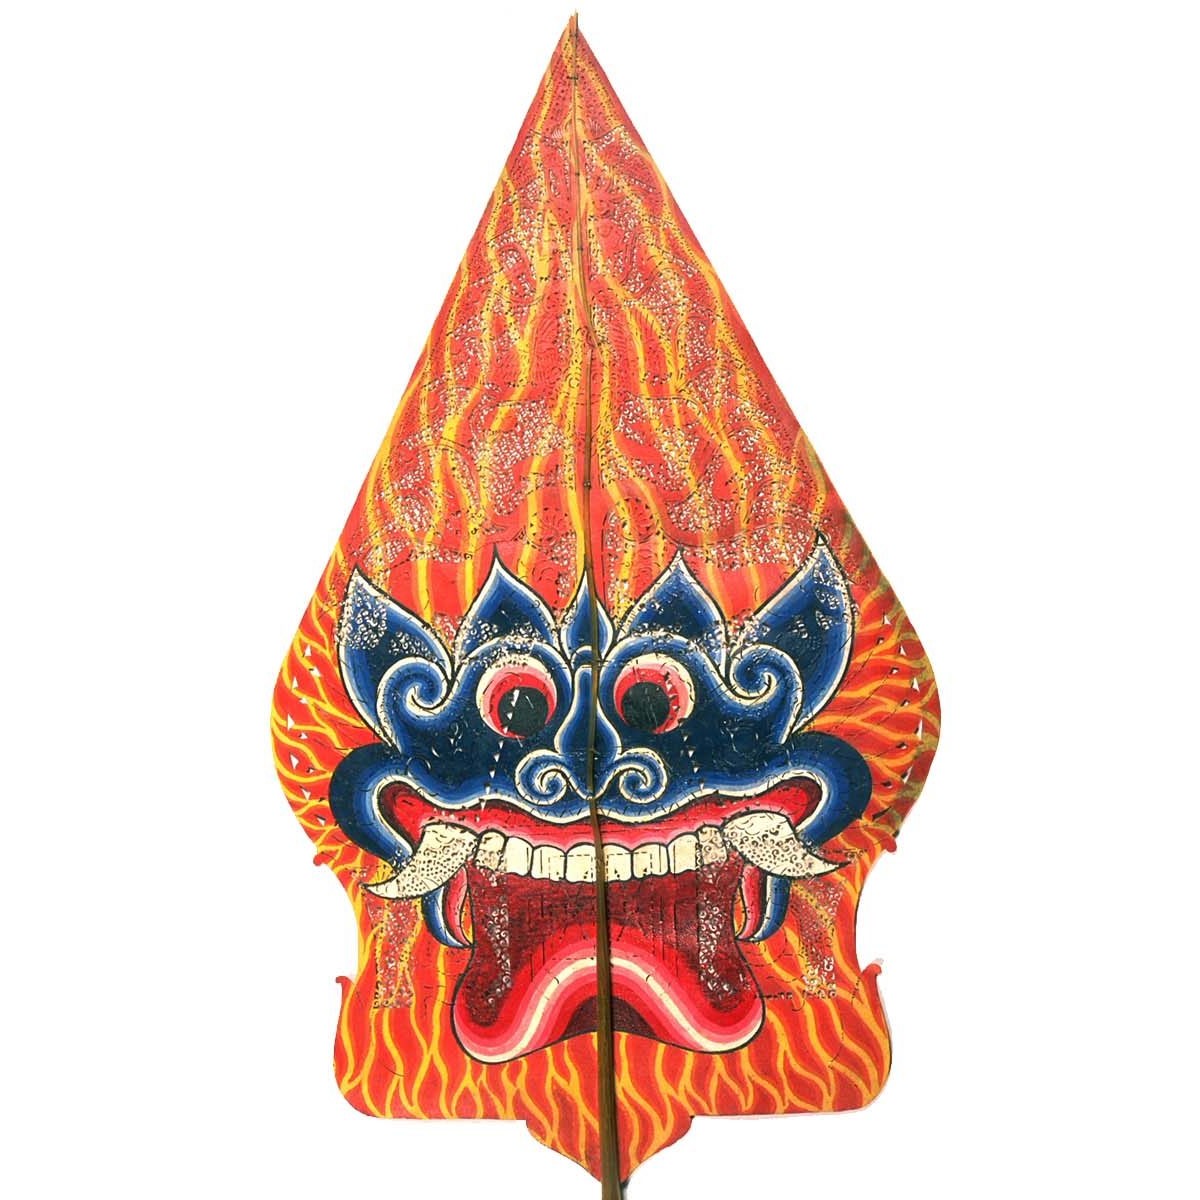 https://give.asianart.org/wp-content/uploads/sites/8/2022/04/Demons-Program-1.jpg 1x, https://give.asianart.org/wp-content/uploads/sites/8/2022/04/Demons-Program-1.jpg 2x